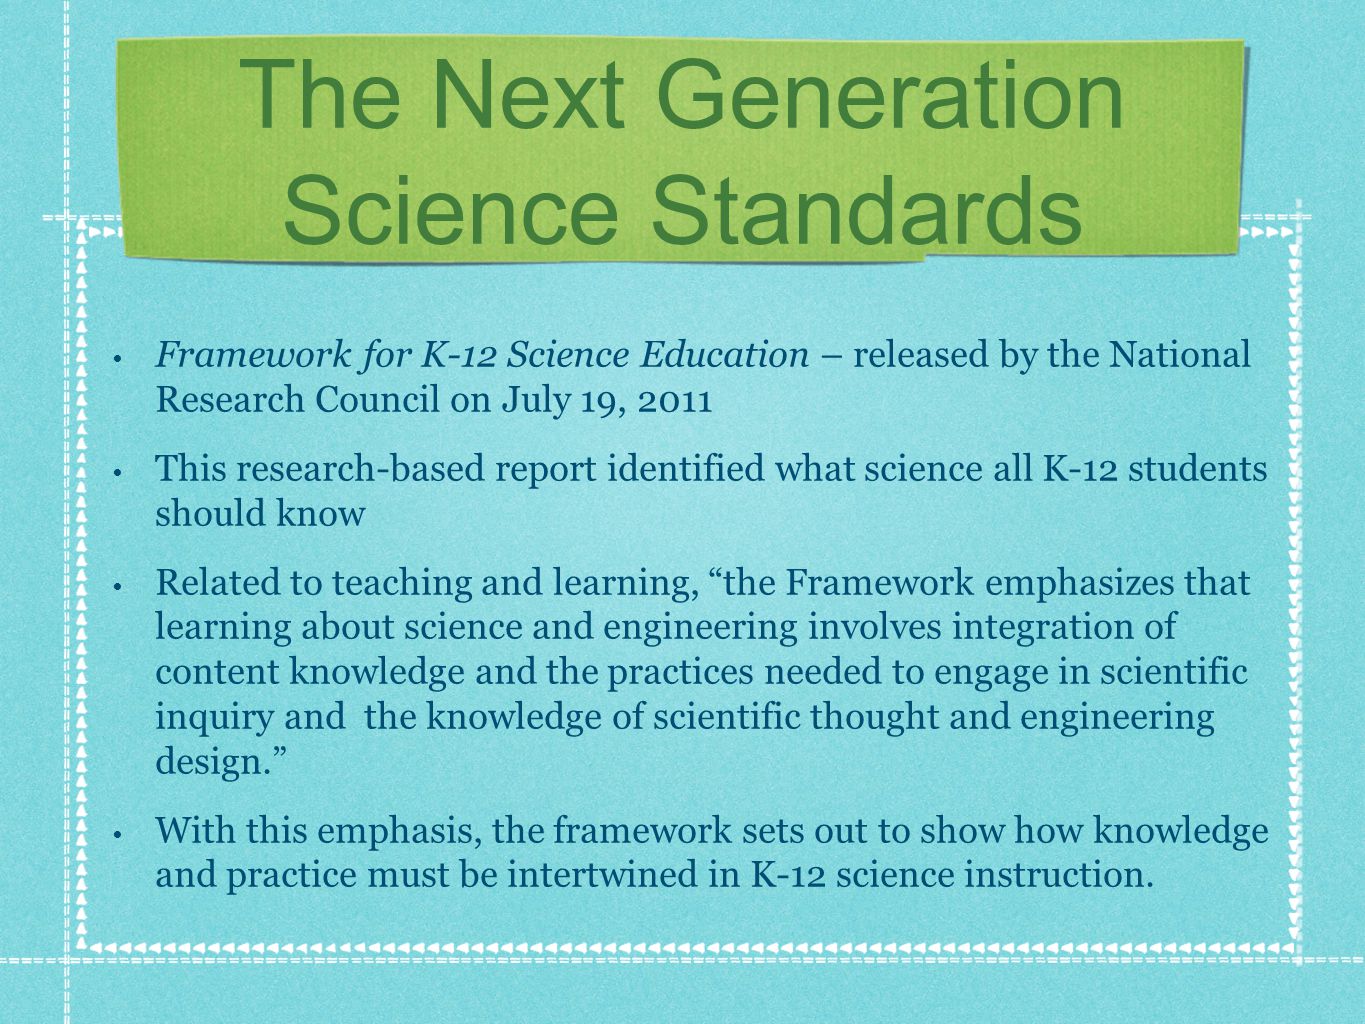 The Next Generation Science Standards Framework for K-12 Science Education – released by the National Research Council on July 19, 2011 This research-based report identified what science all K-12 students should know Related to teaching and learning, the Framework emphasizes that learning about science and engineering involves integration of content knowledge and the practices needed to engage in scientific inquiry and the knowledge of scientific thought and engineering design.